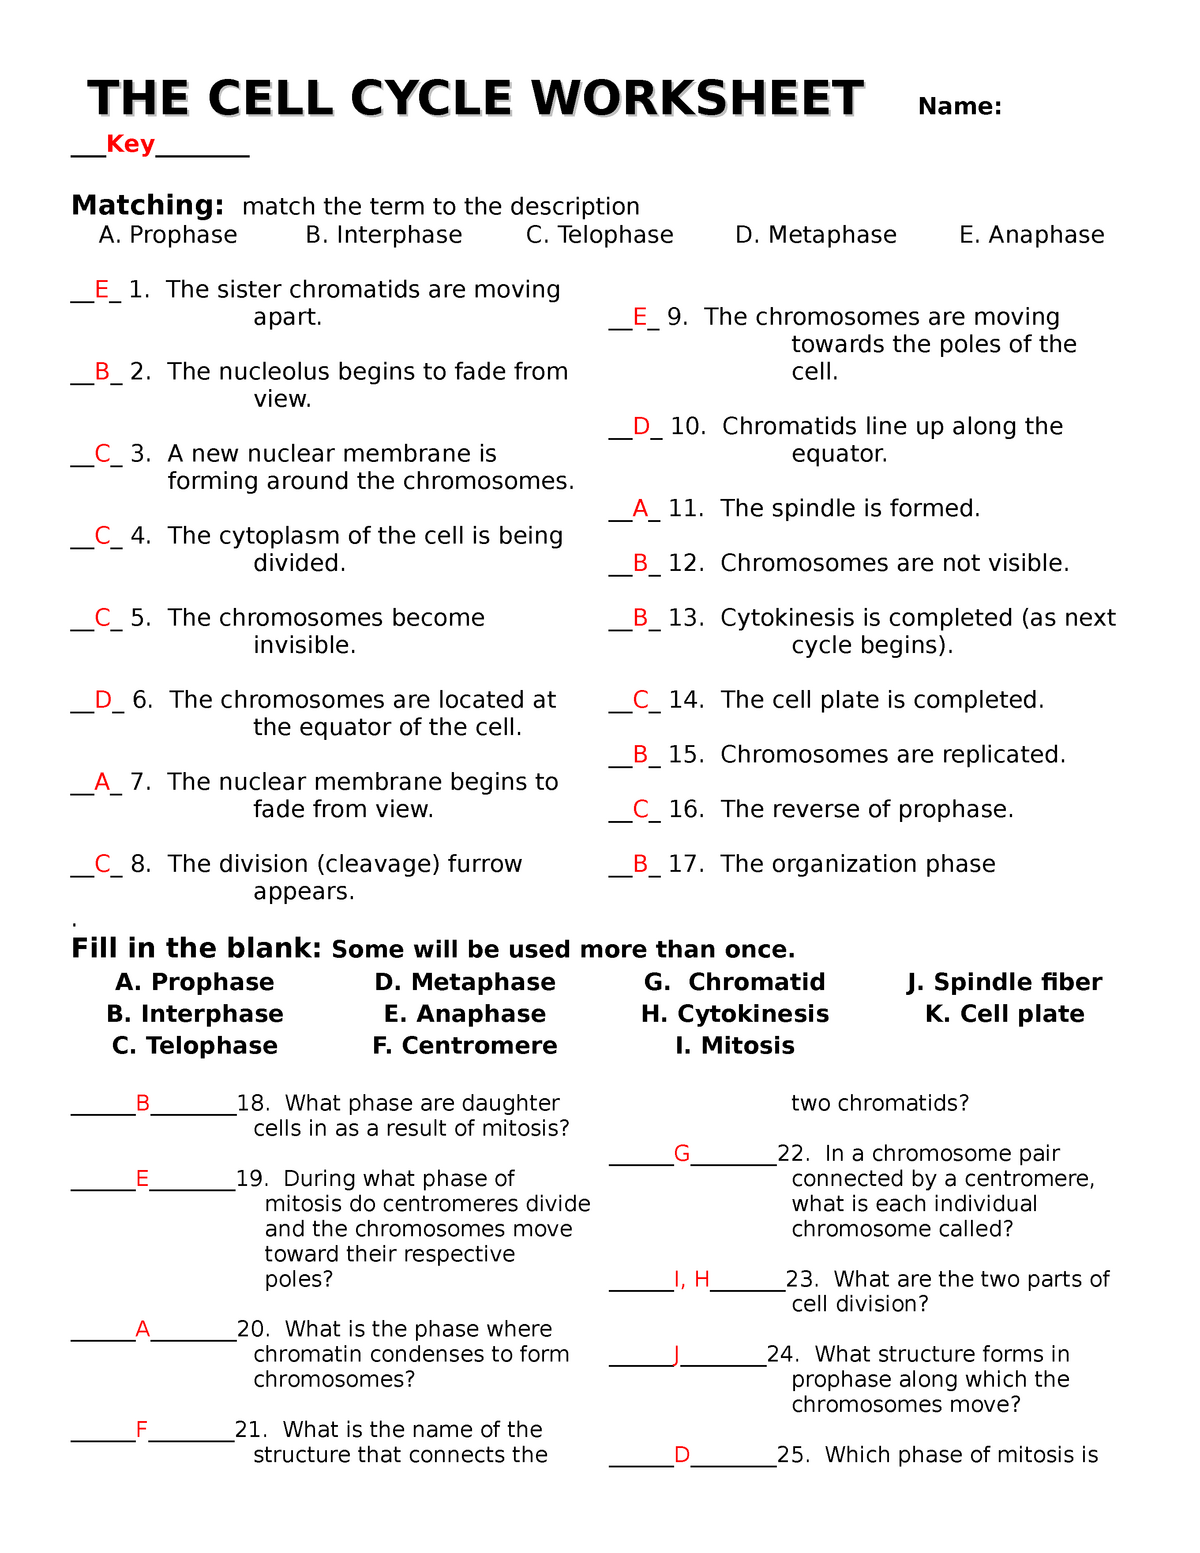 The-cell-cycle-worksheet with answers - BIOG-20 - Explorations in Within Cell Cycle And Mitosis Worksheet